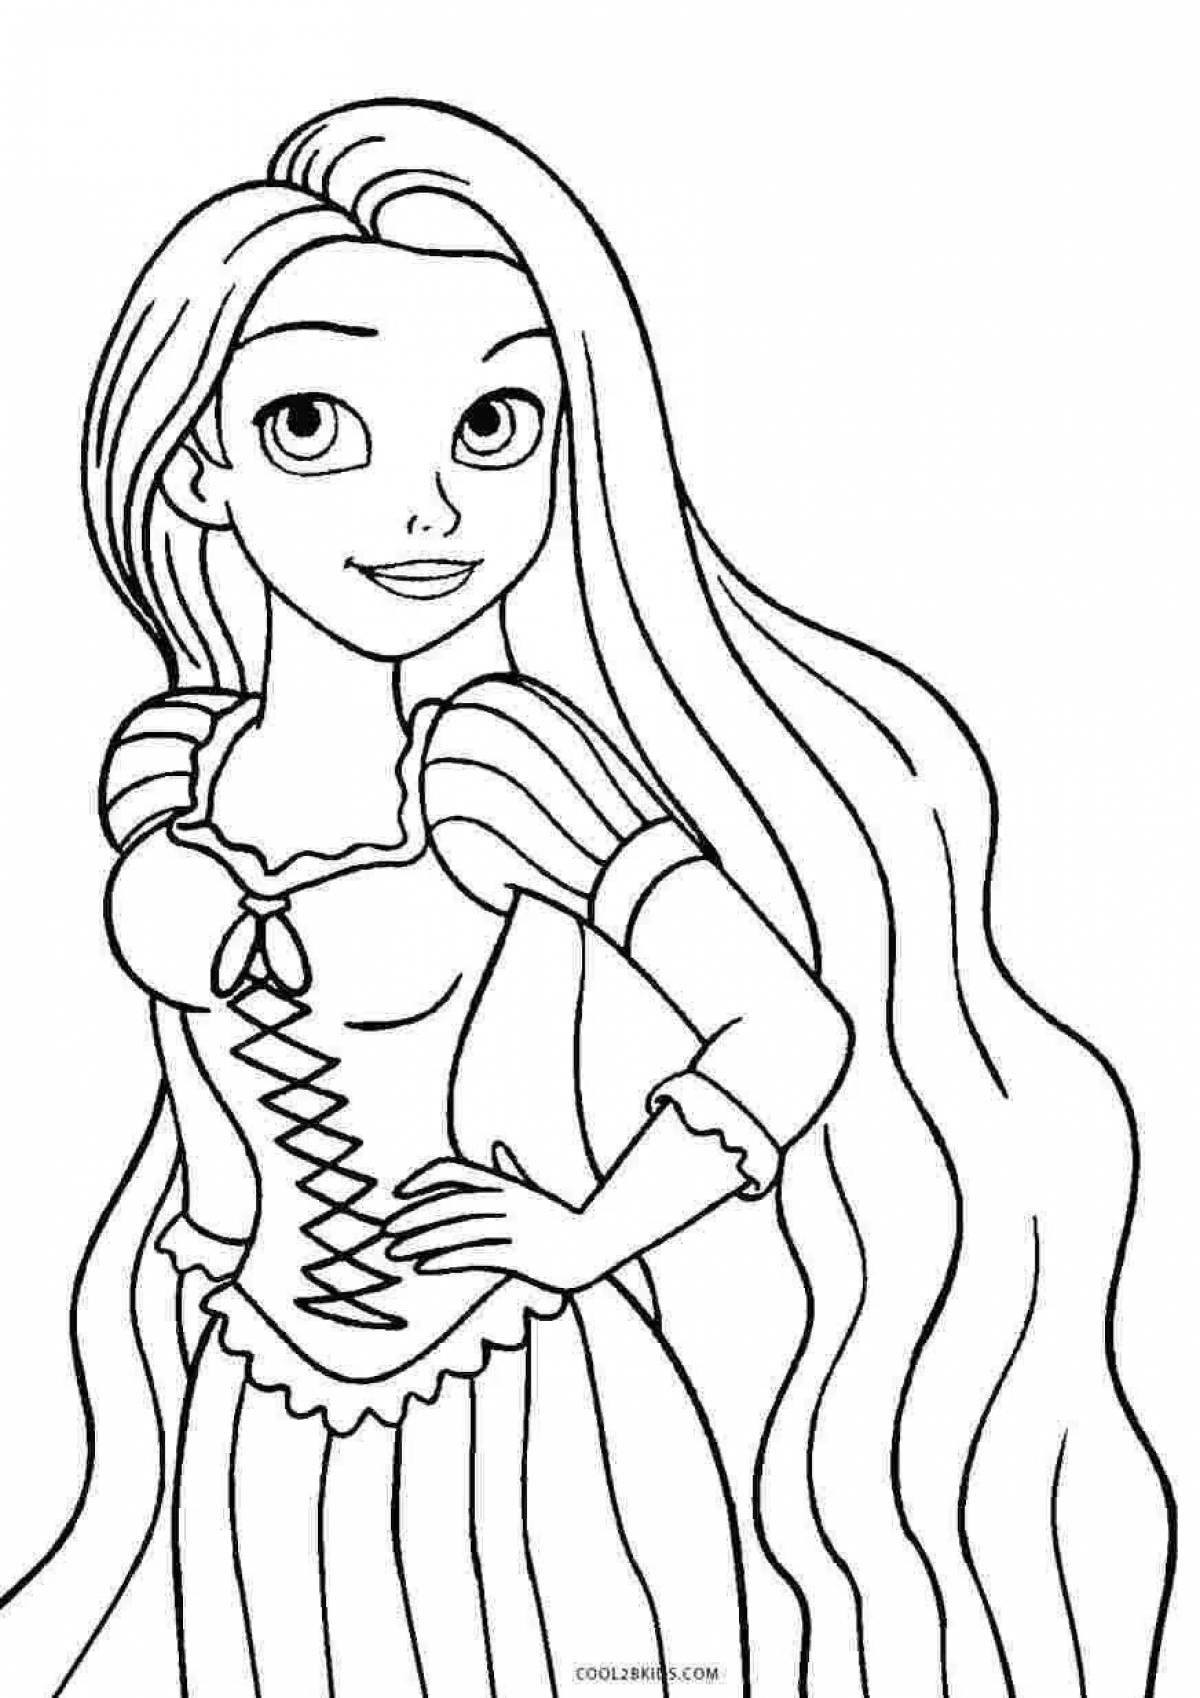 Glorious rampoelsel coloring page